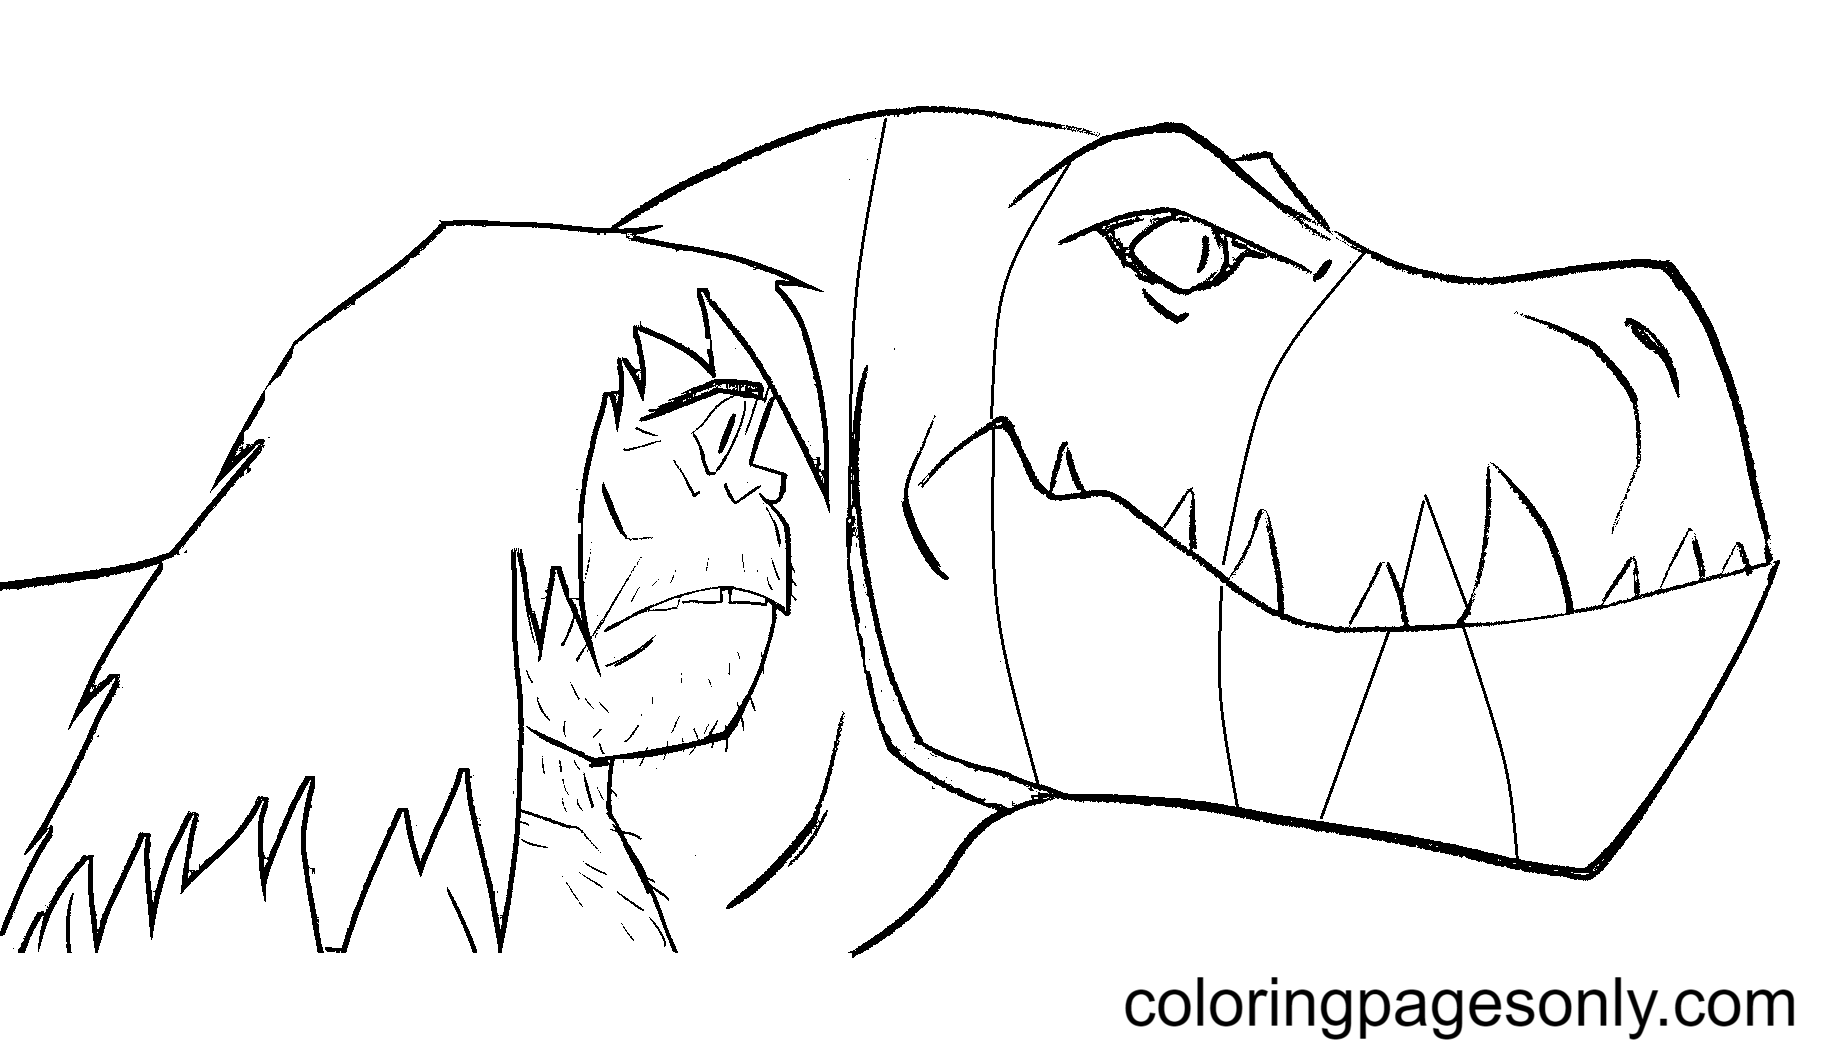 Primal – Spear with Fang Coloring Pages